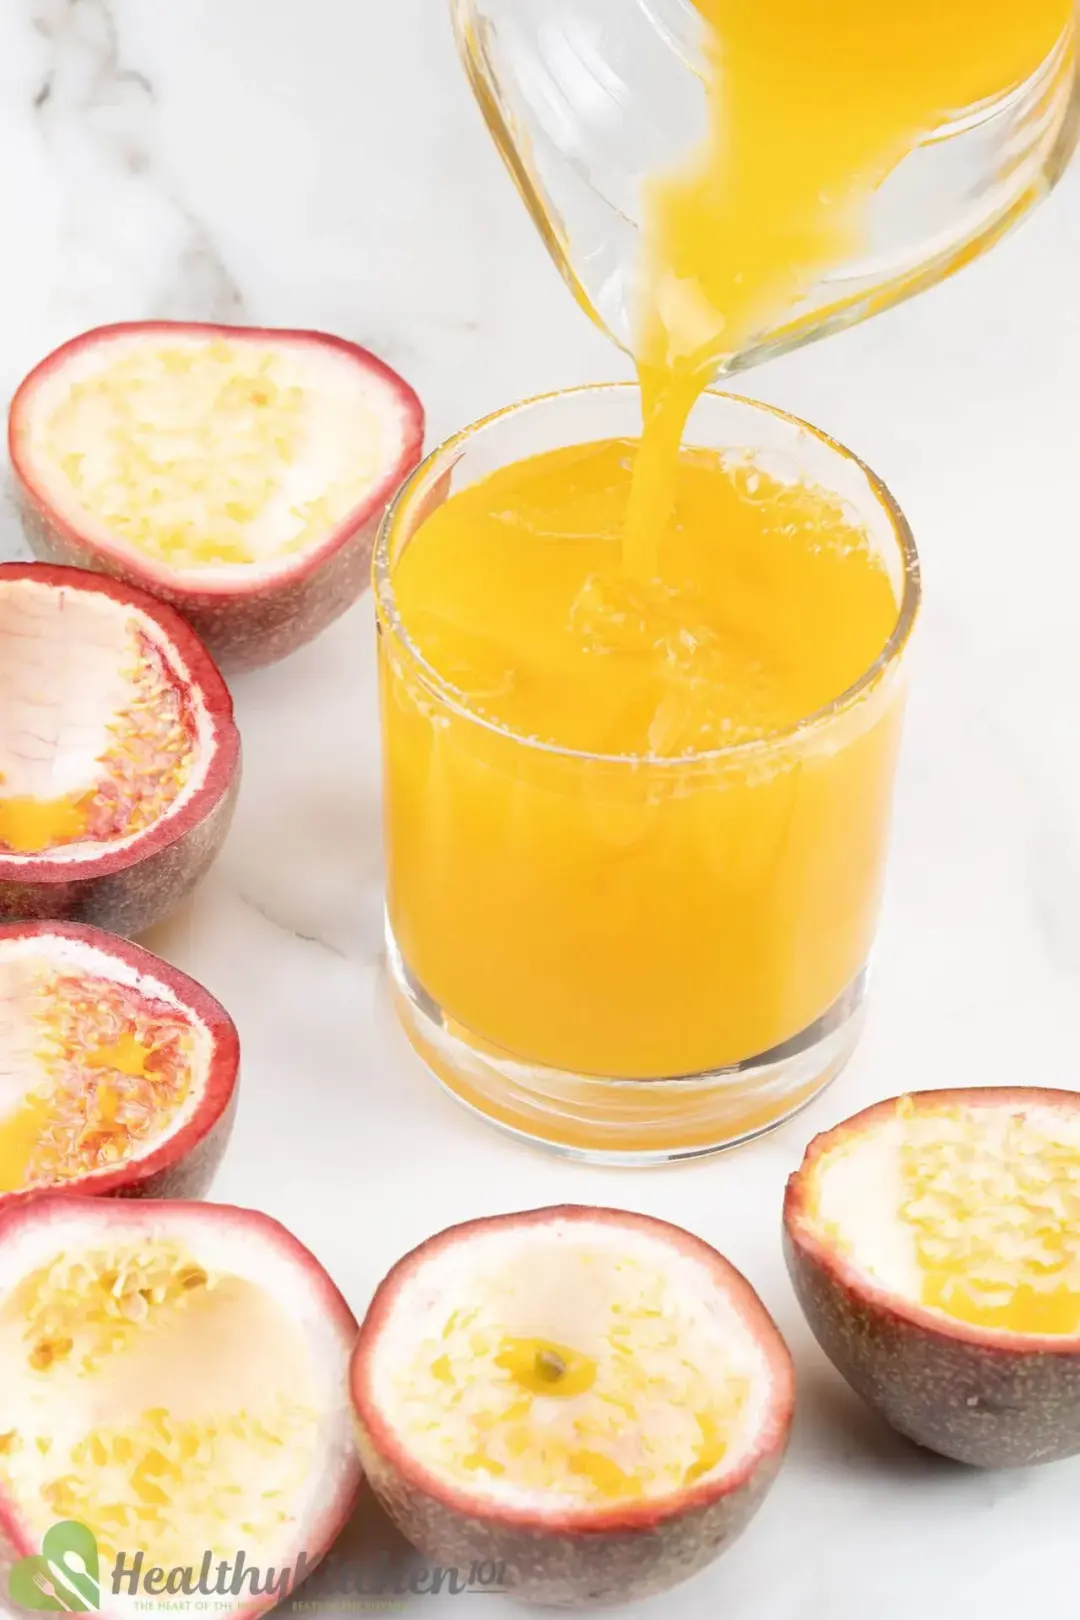 Pouring a passion fruit margarita into a short glass with ice, next to hollow shells of passion fruits